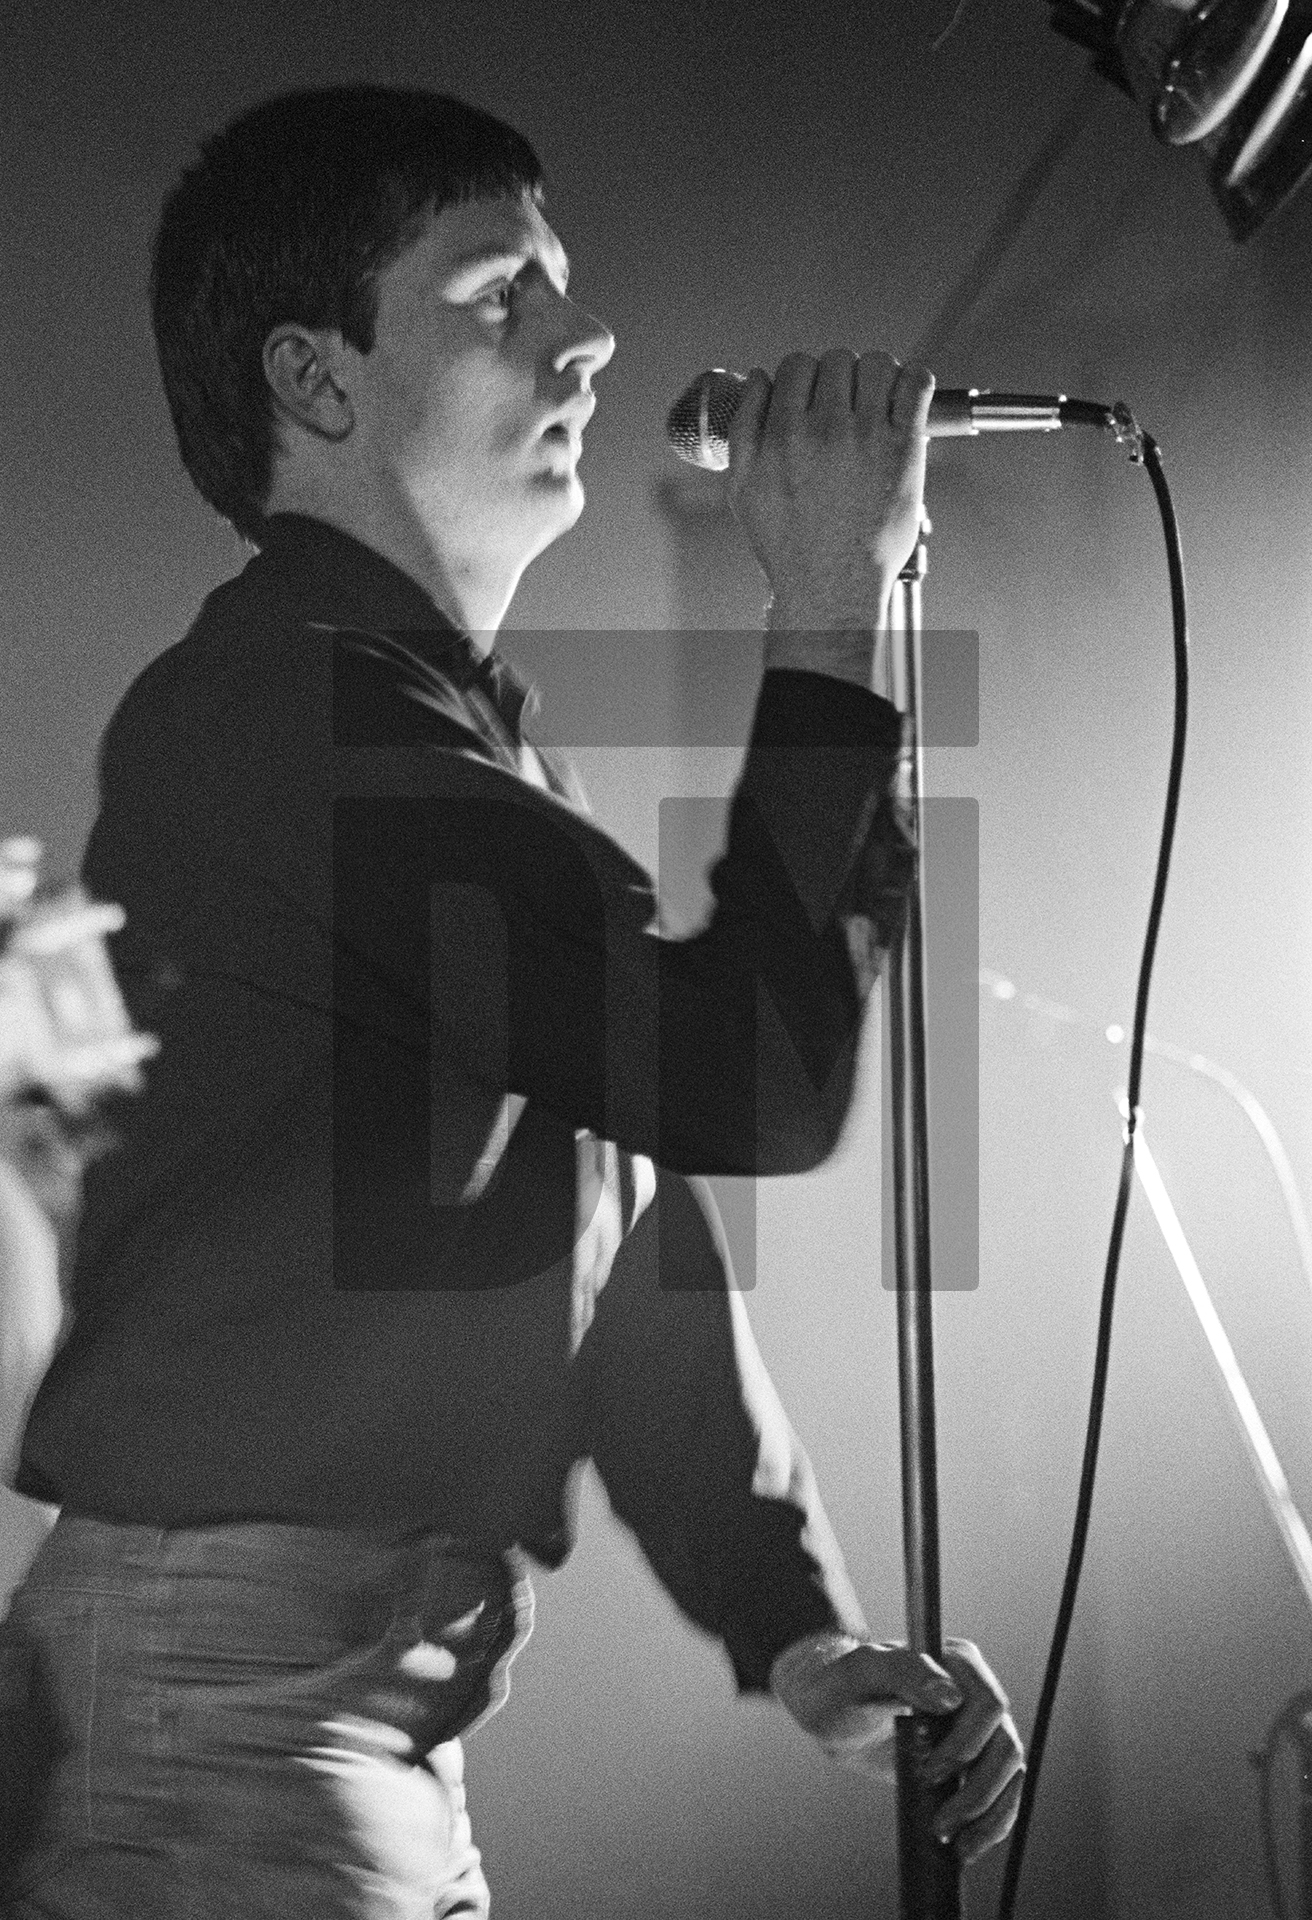 Ian Curtis of Joy Division on stage at New Osbourne Club, Miles Platting, Manchester. 7 February 1980 by Daniel Meadows